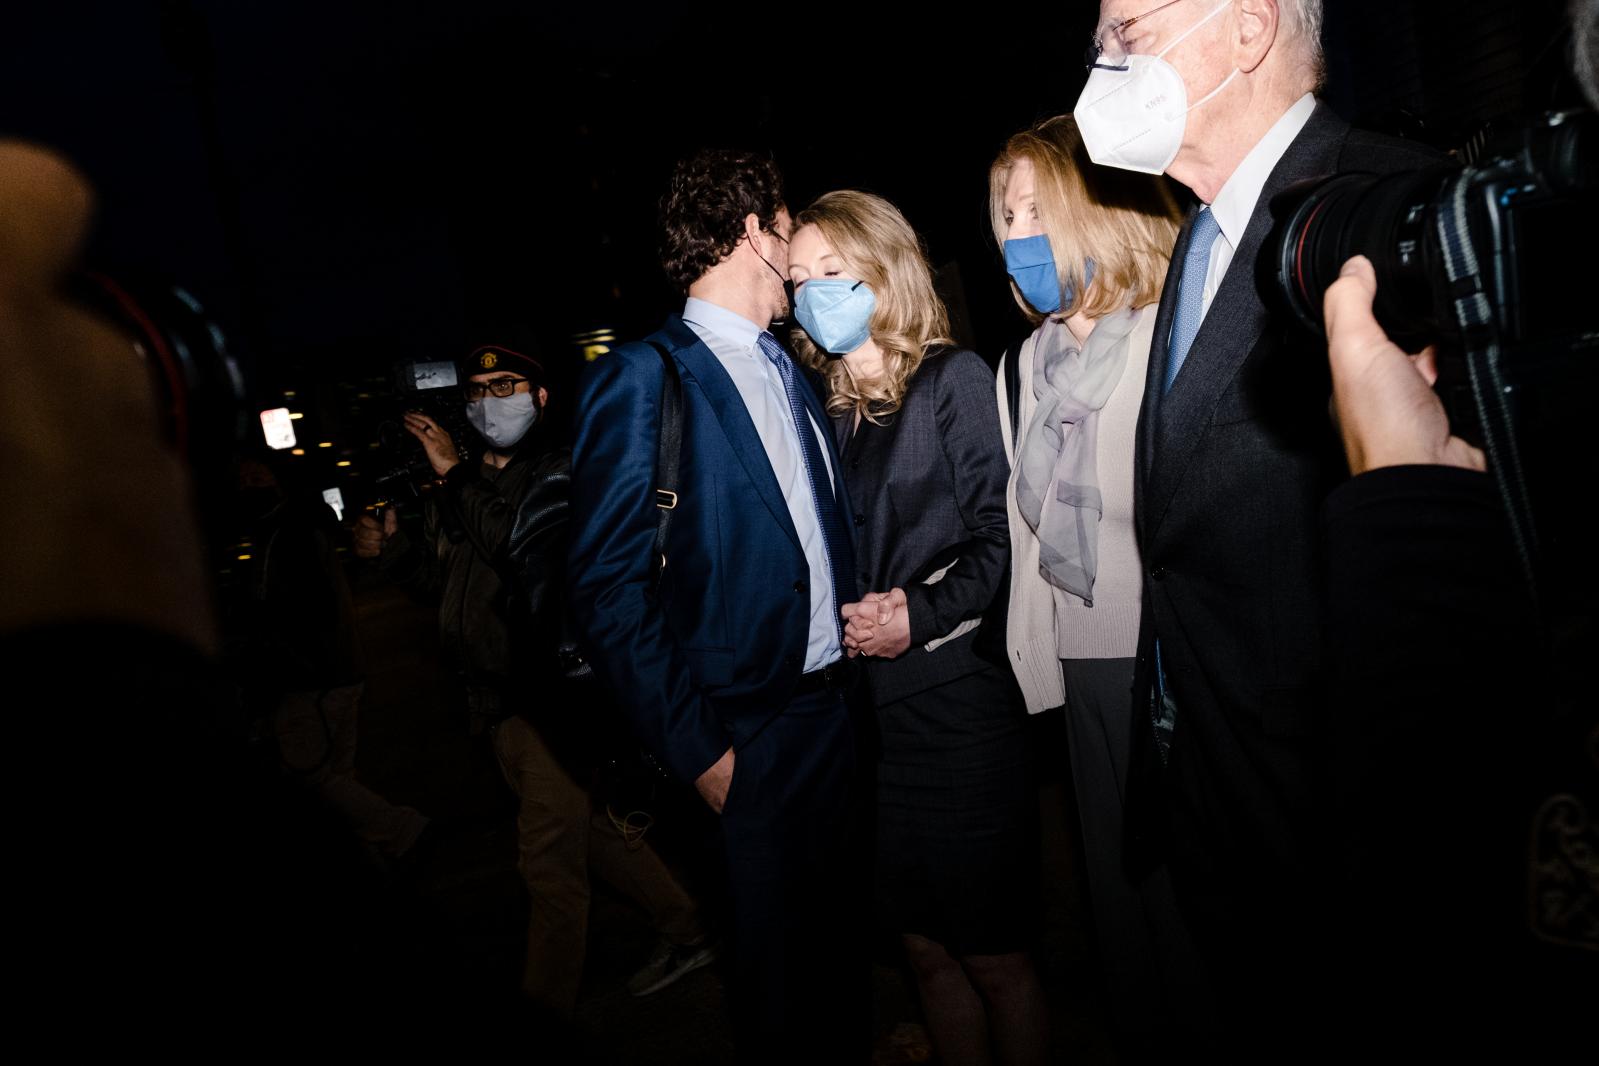 Image from NEWS FEATURES - Elizabeth Holmes, center, pauses with her partner, Billy...